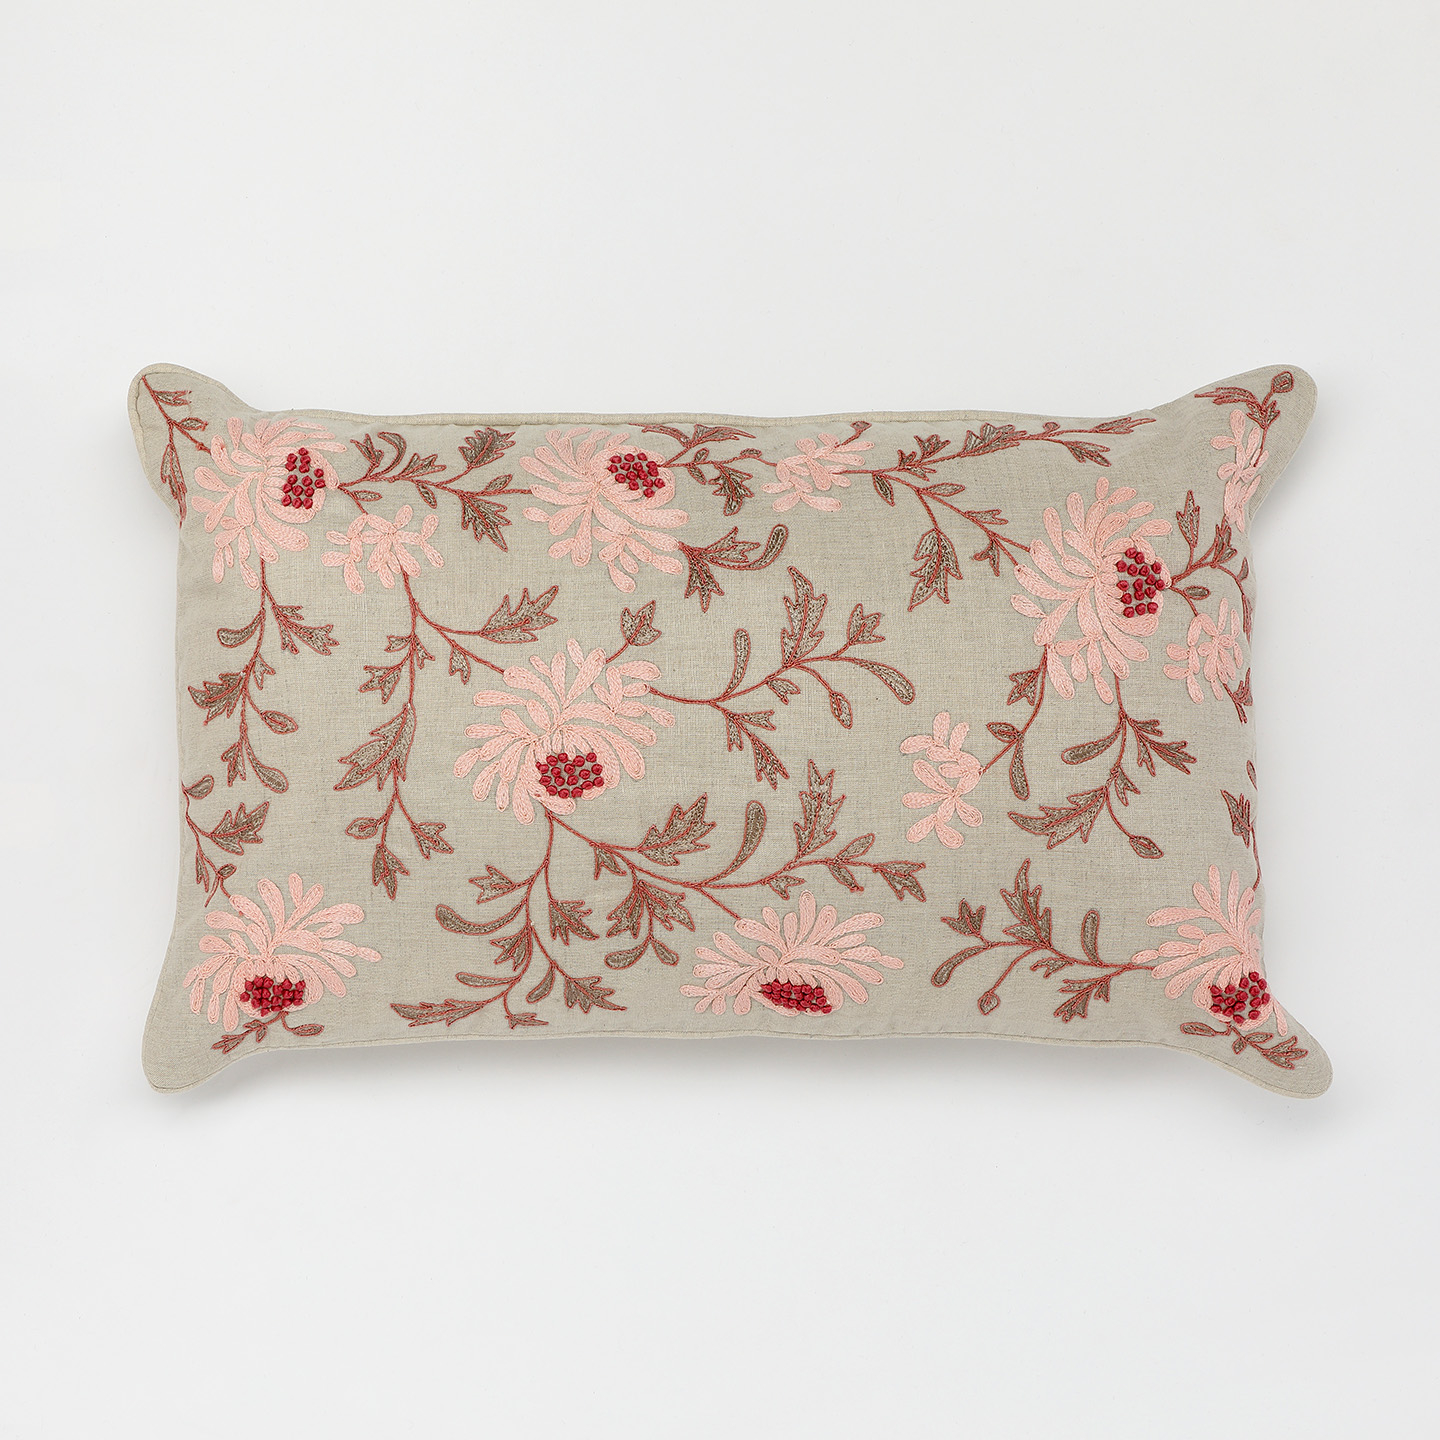 Cushion Cover Embroidery Patterns Blossom Embroidered Cushion Cover